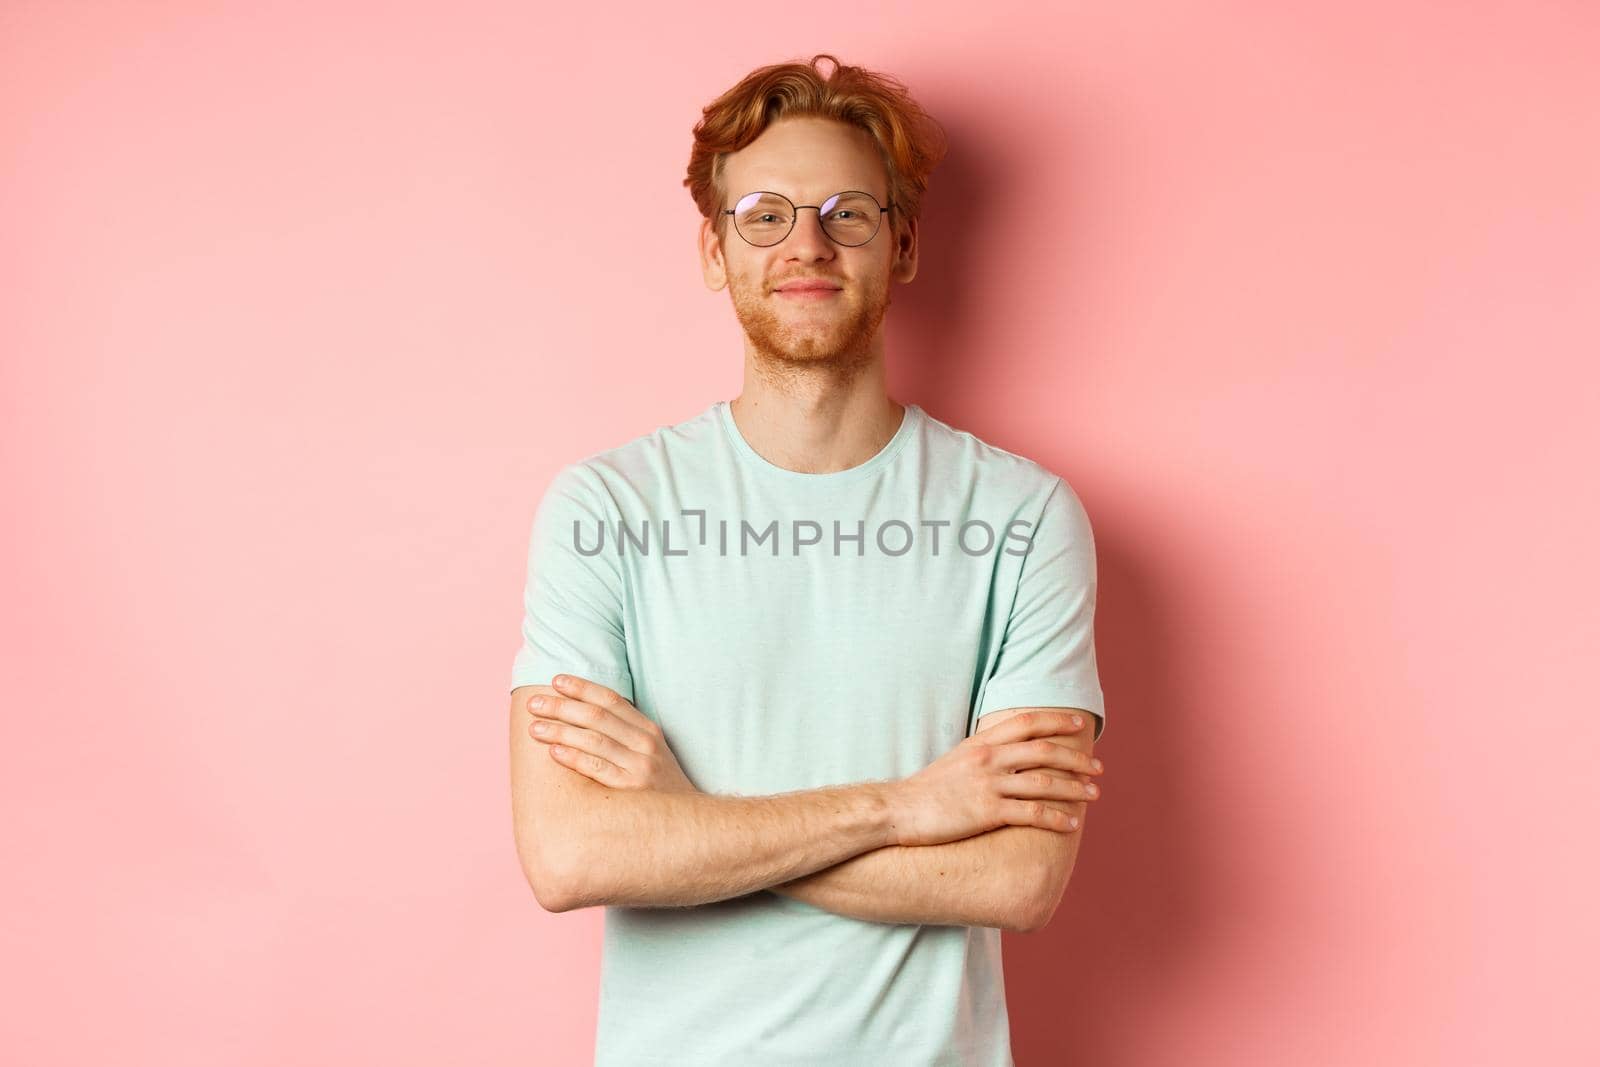 Portrait of satisfied caucasian man with red hair and beard, cross arms on chest and smiling with smug face, wearing glasses, standing over pink background.